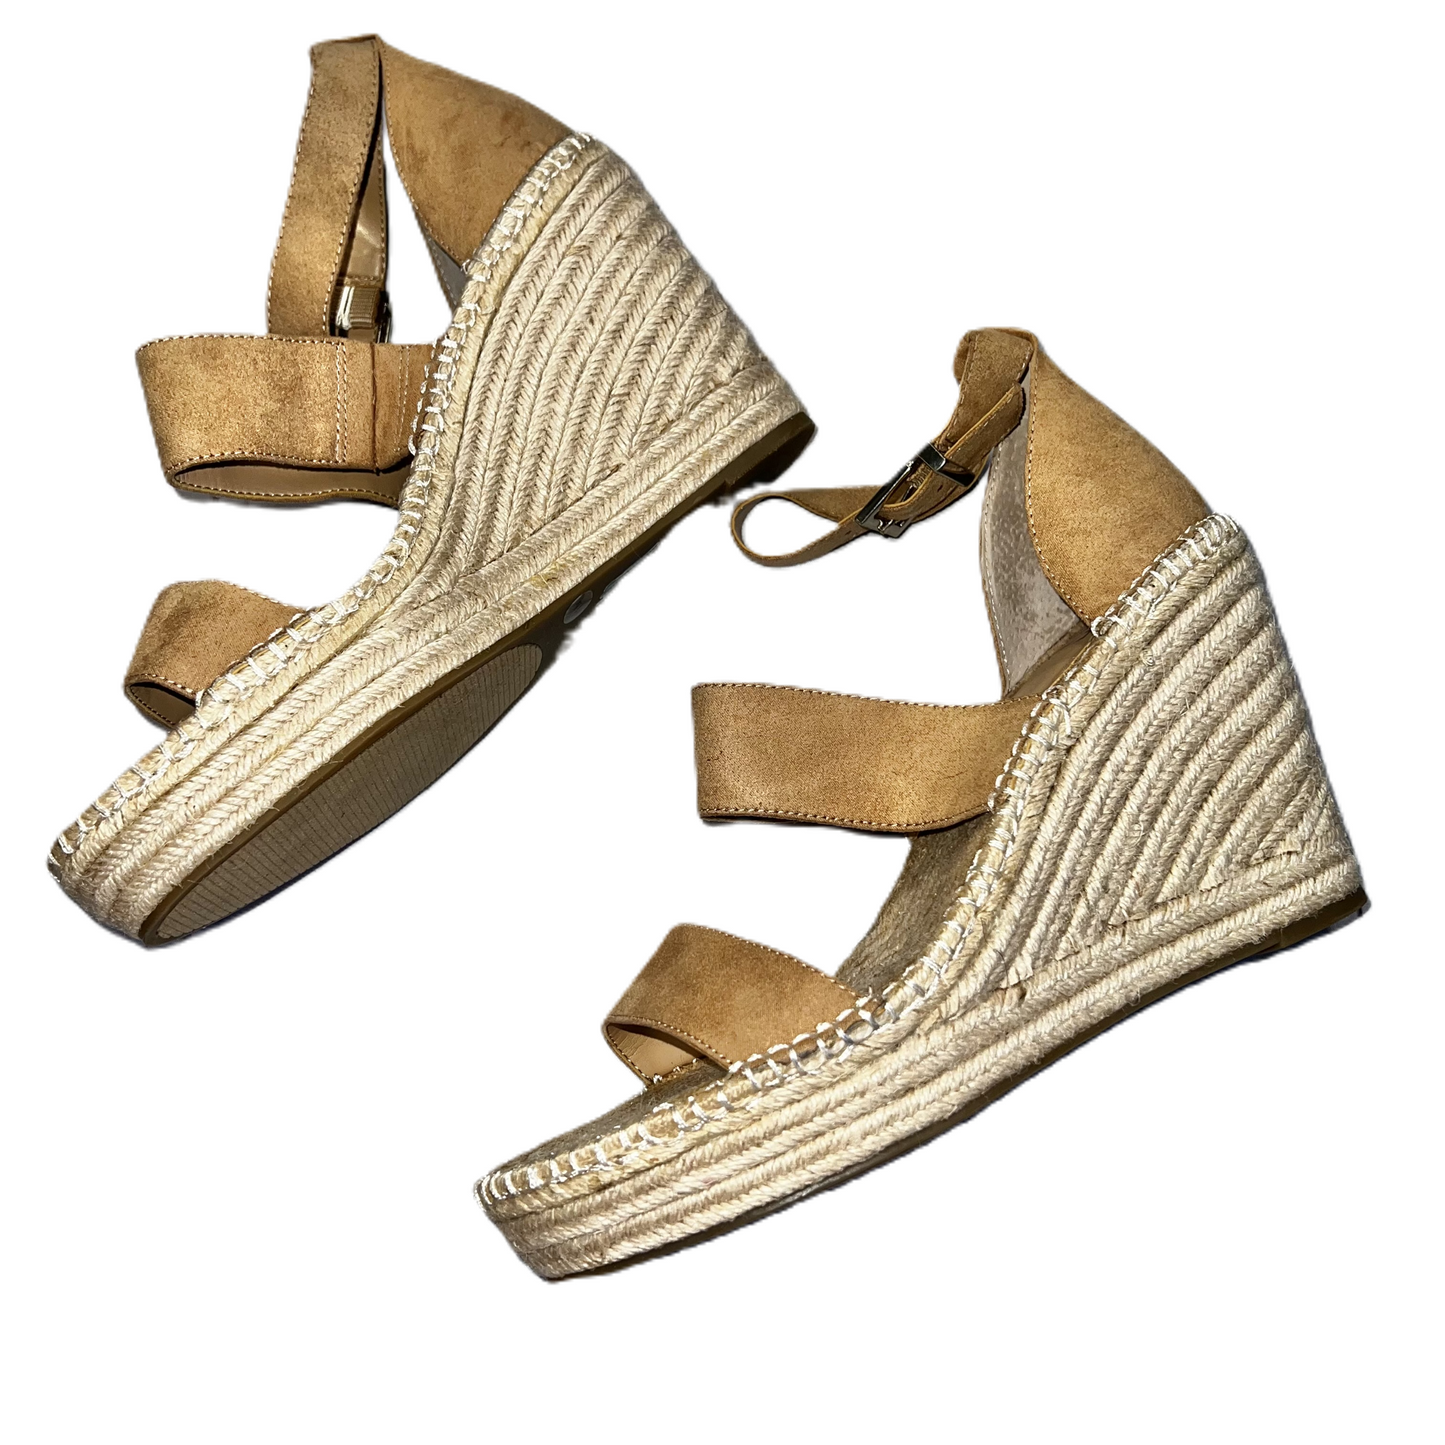 Tan Sandals Heels Wedge By Inc, Size: 11